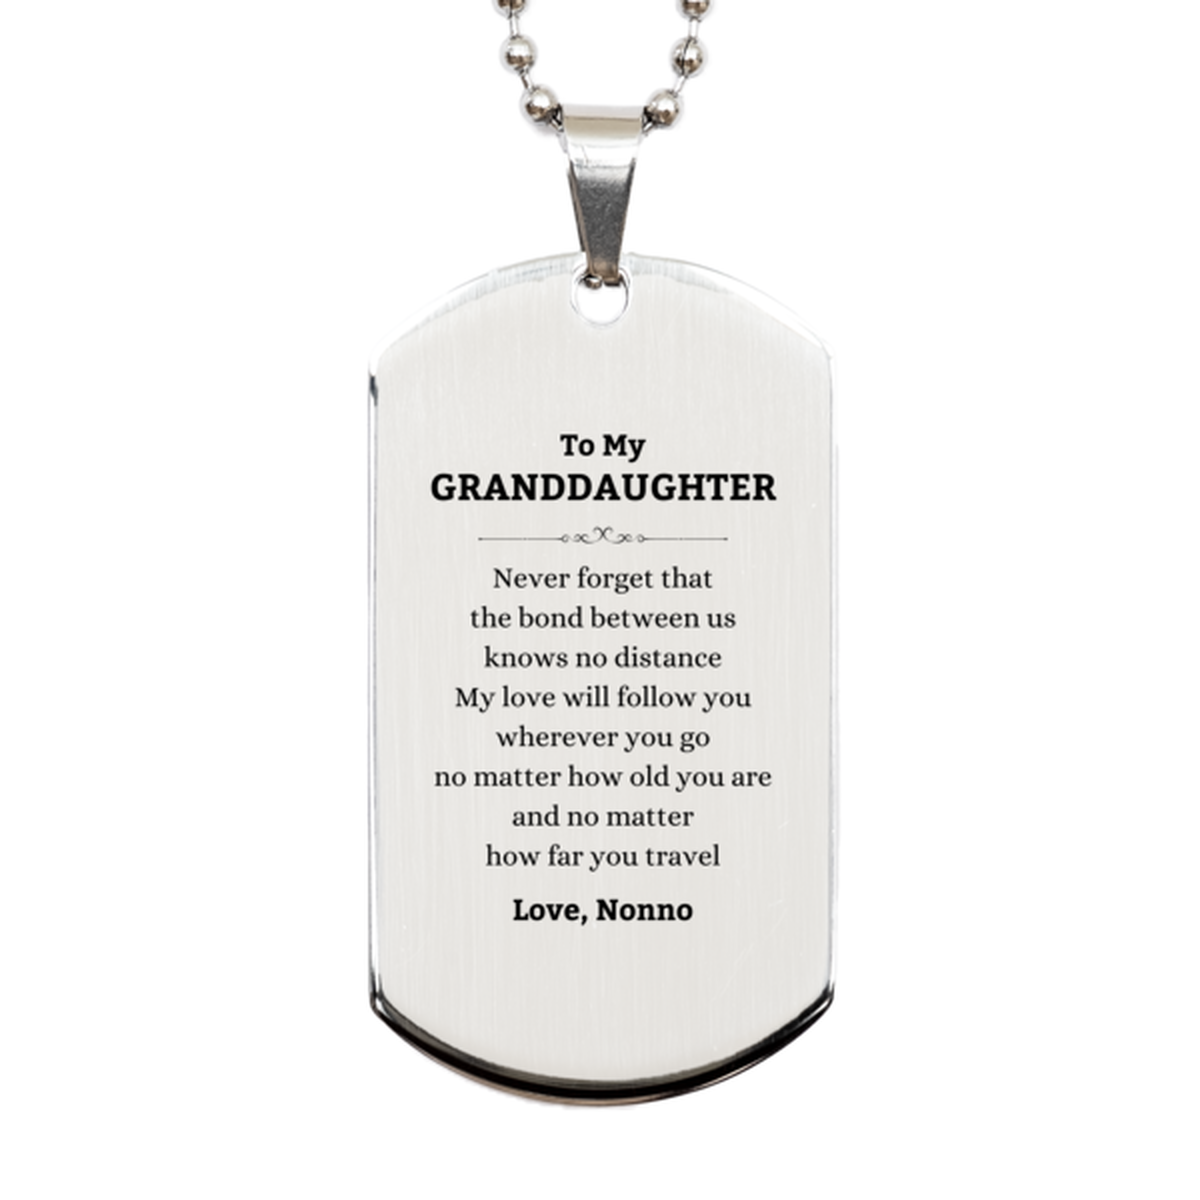 Granddaughter Birthday Gifts from Nonno, Adjustable Silver Dog Tag for Granddaughter Christmas Graduation Unique Gifts Granddaughter Never forget that the bond between us knows no distance. Love, Nonno